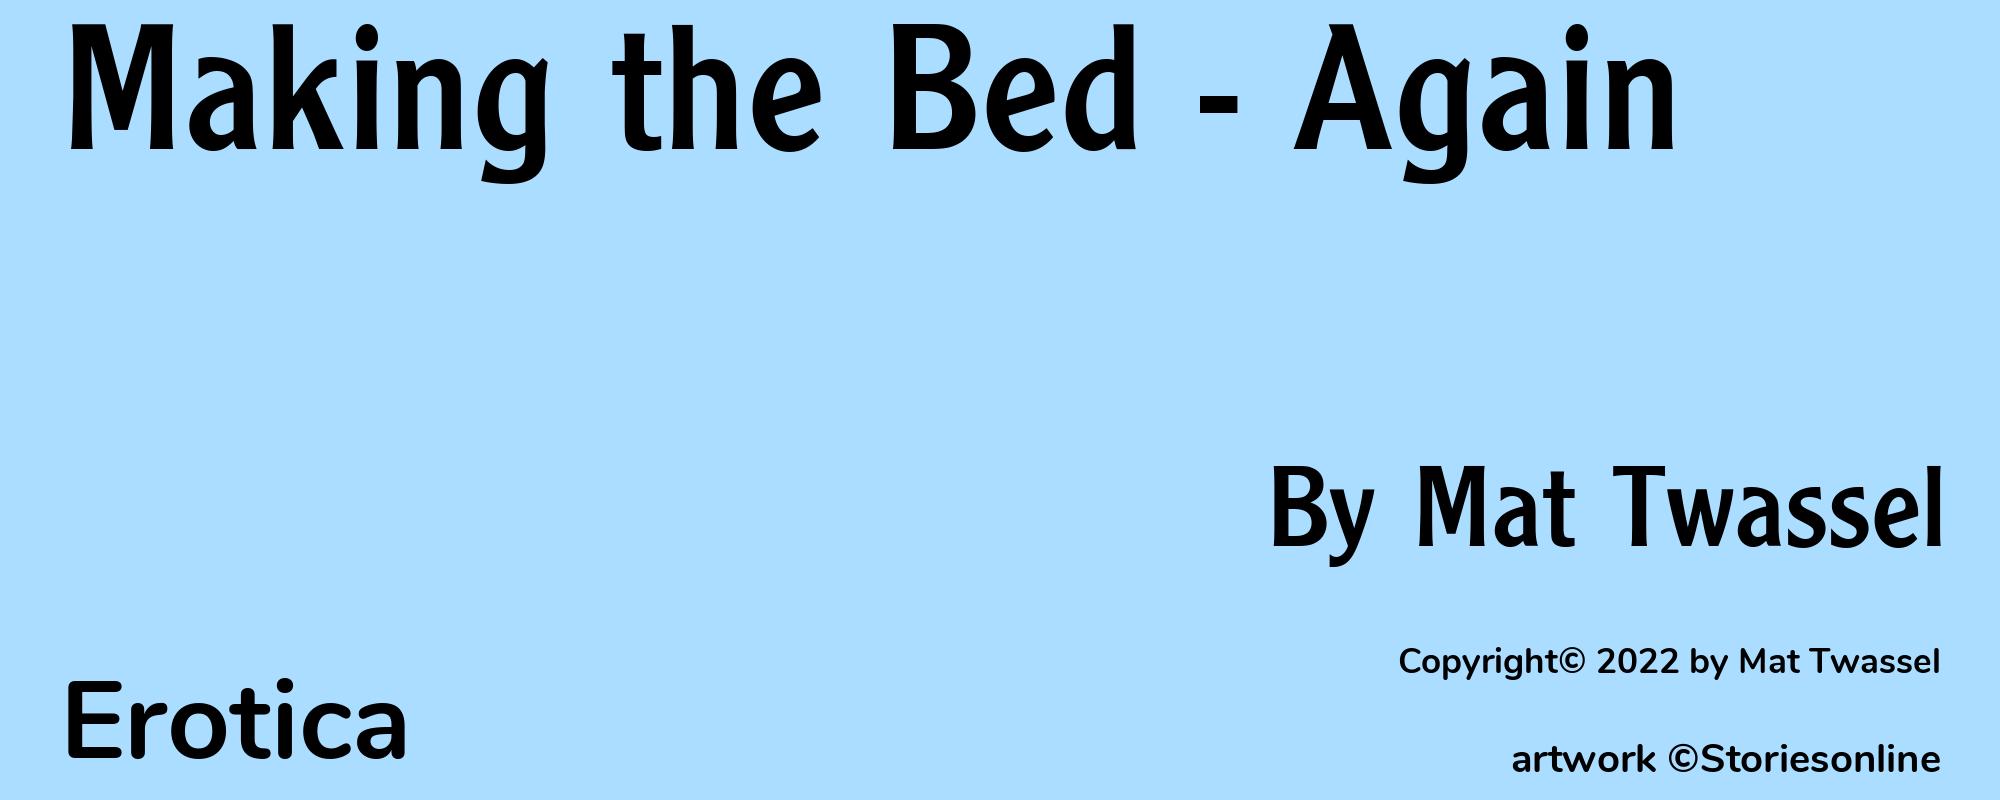 Making the Bed - Again - Cover